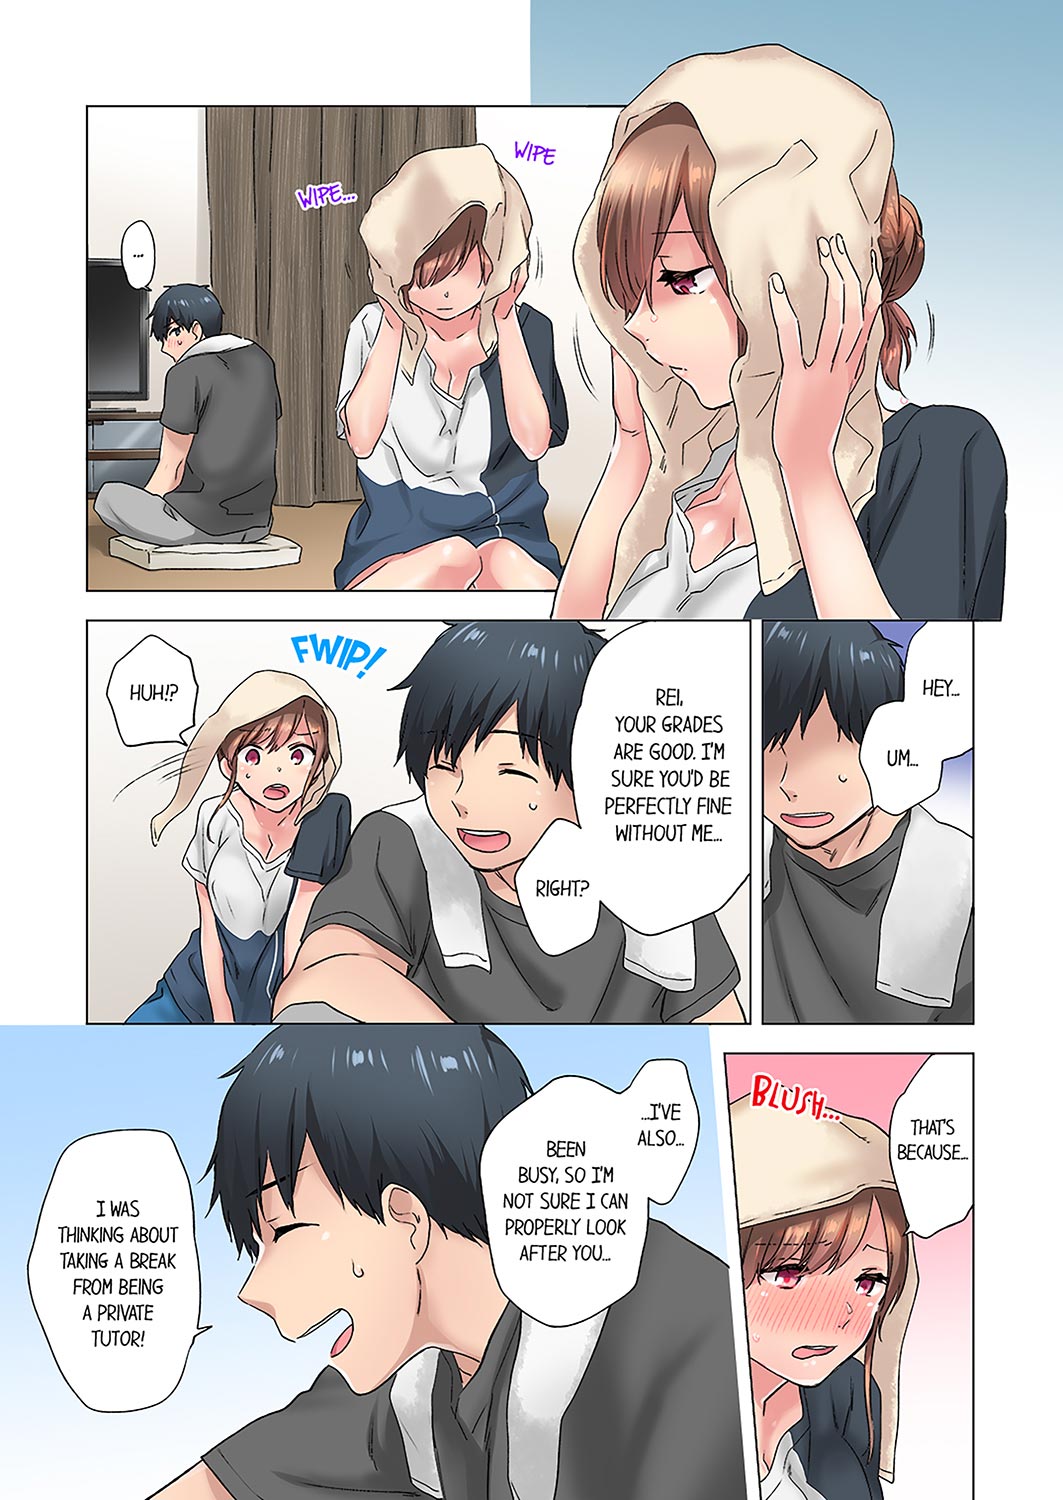 A Scorching Hot Day with A Broken Air Conditioner. If I Keep Having Sex with My Sweaty Childhood Friend… - Chapter 6 Page 7